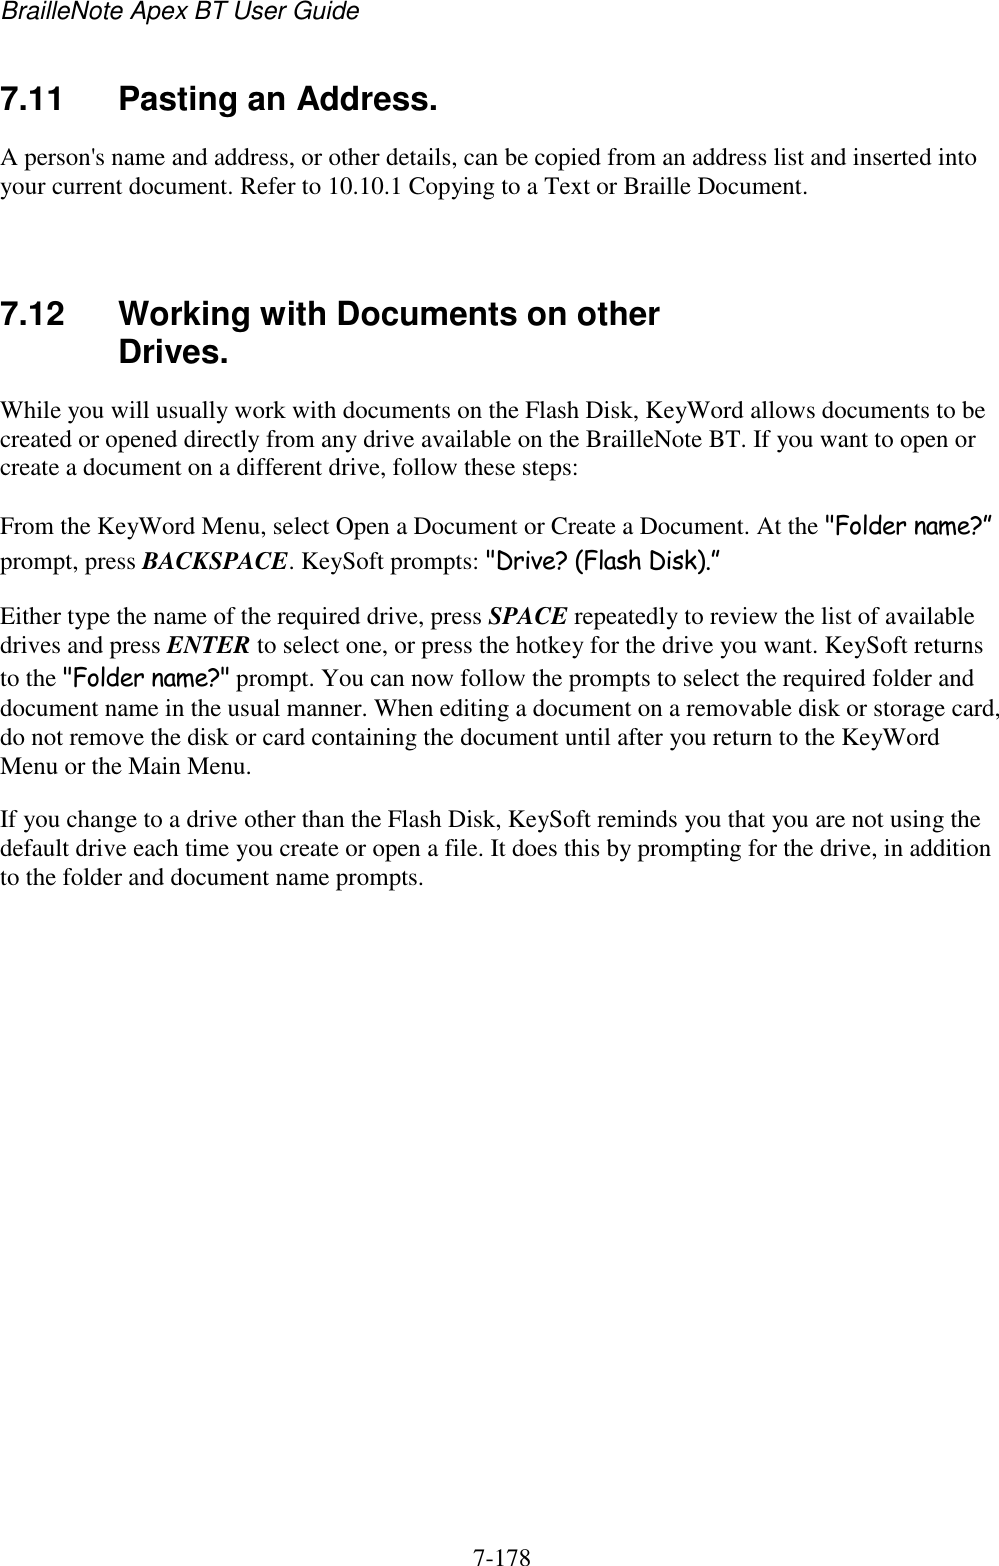 BrailleNote Apex BT User Guide   7-178   7.11  Pasting an Address. A person&apos;s name and address, or other details, can be copied from an address list and inserted into your current document. Refer to 10.10.1 Copying to a Text or Braille Document.   7.12  Working with Documents on other Drives. While you will usually work with documents on the Flash Disk, KeyWord allows documents to be created or opened directly from any drive available on the BrailleNote BT. If you want to open or create a document on a different drive, follow these steps: From the KeyWord Menu, select Open a Document or Create a Document. At the &quot;Folder name?” prompt, press BACKSPACE. KeySoft prompts: &quot;Drive? (Flash Disk).” Either type the name of the required drive, press SPACE repeatedly to review the list of available drives and press ENTER to select one, or press the hotkey for the drive you want. KeySoft returns to the &quot;Folder name?&quot; prompt. You can now follow the prompts to select the required folder and document name in the usual manner. When editing a document on a removable disk or storage card, do not remove the disk or card containing the document until after you return to the KeyWord Menu or the Main Menu. If you change to a drive other than the Flash Disk, KeySoft reminds you that you are not using the default drive each time you create or open a file. It does this by prompting for the drive, in addition to the folder and document name prompts.  